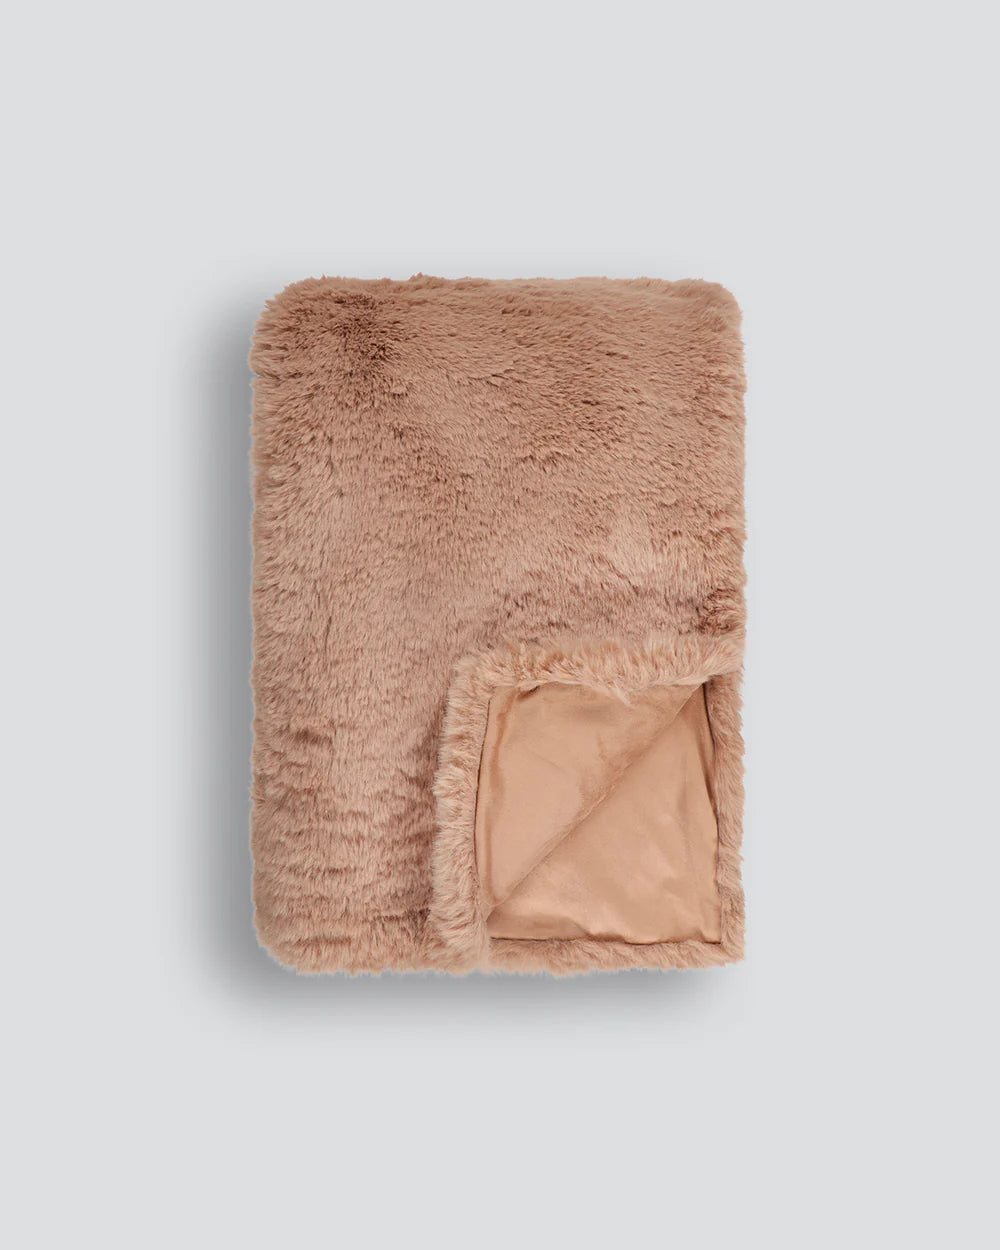 Baya Pele Faux Fur Toasted Coconut Throw Rug Blanket is available from Make Your House A Home Premium Stockist. Furniture Store Bendigo, Victoria. Australia Wide Delivery. Furtex.